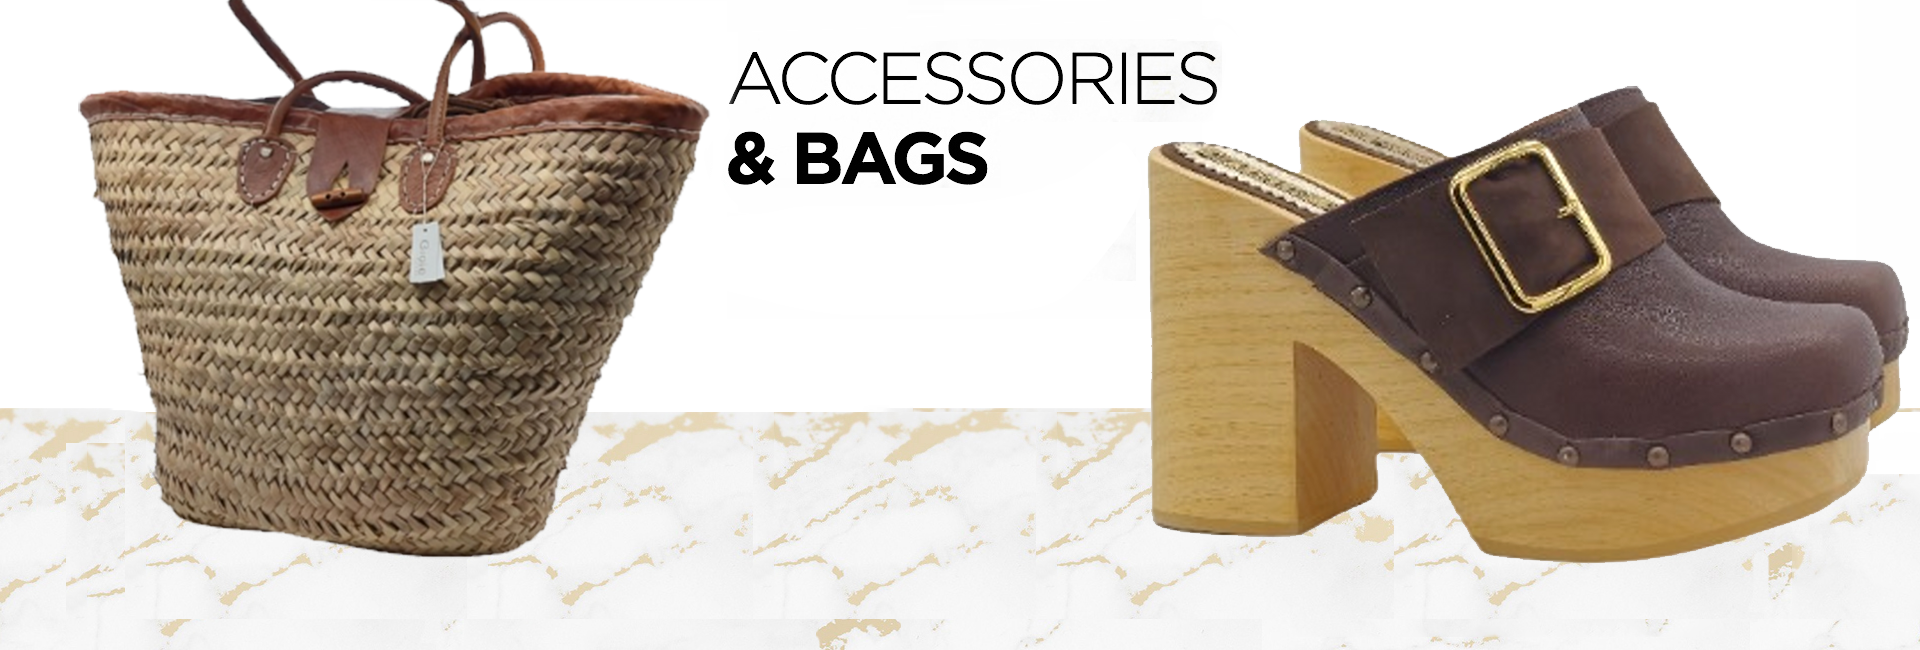 Accessories & Bags 2